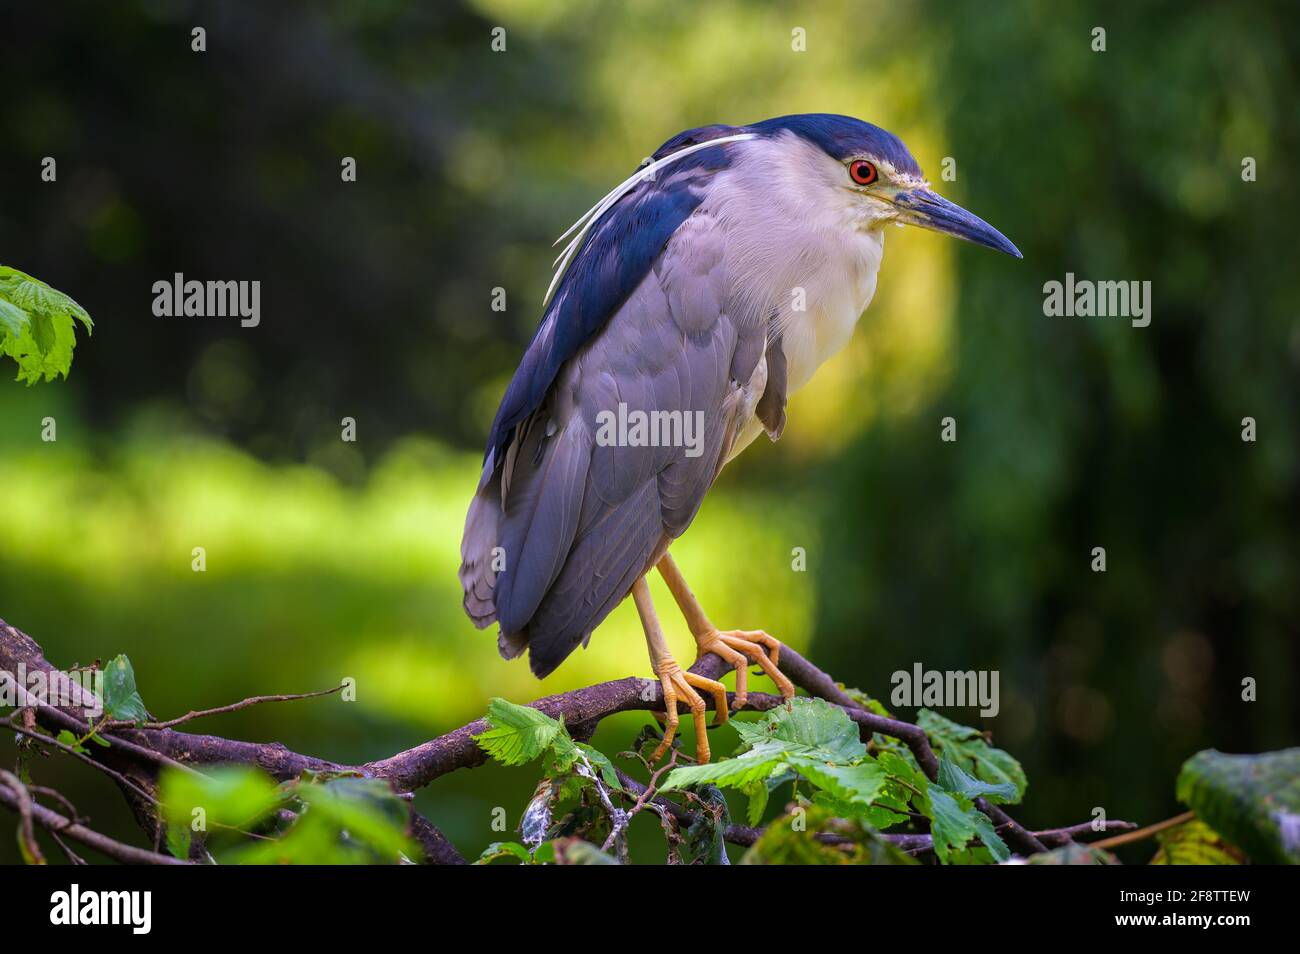 Closeup portrait of a Black-Crowned Night Heron Stock Photo